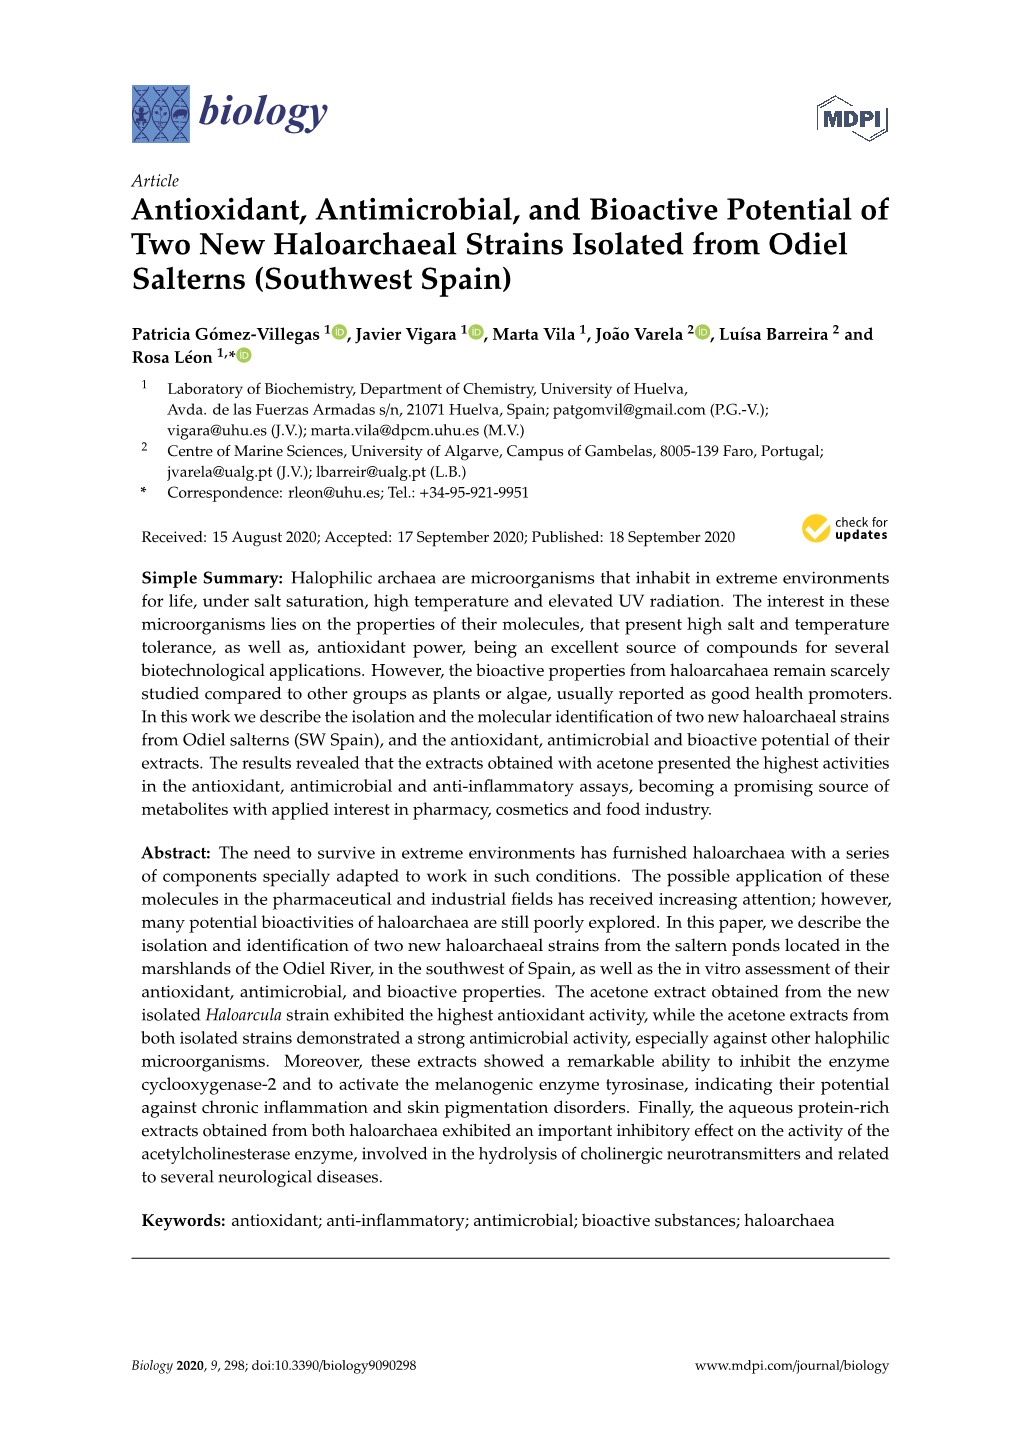 Antioxidant, Antimicrobial, and Bioactive Potential of Two New Haloarchaeal Strains Isolated from Odiel Salterns (Southwest Spain)